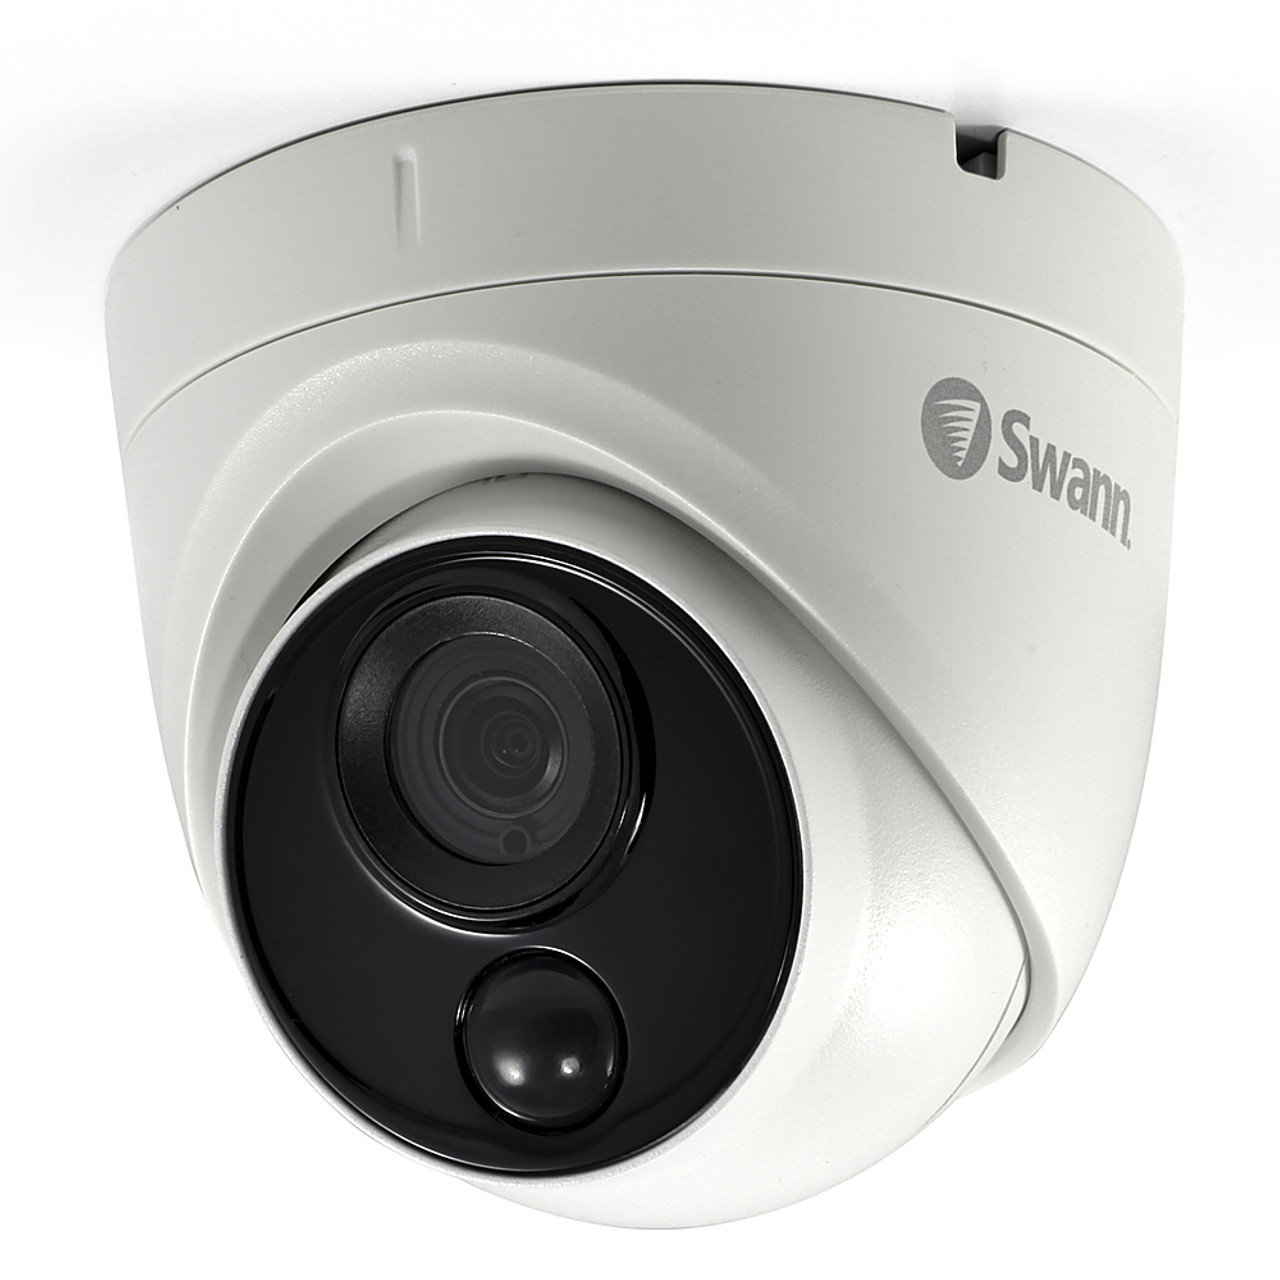 Swann 4K Dome, Add on Dome Camera w/Night Vision - White